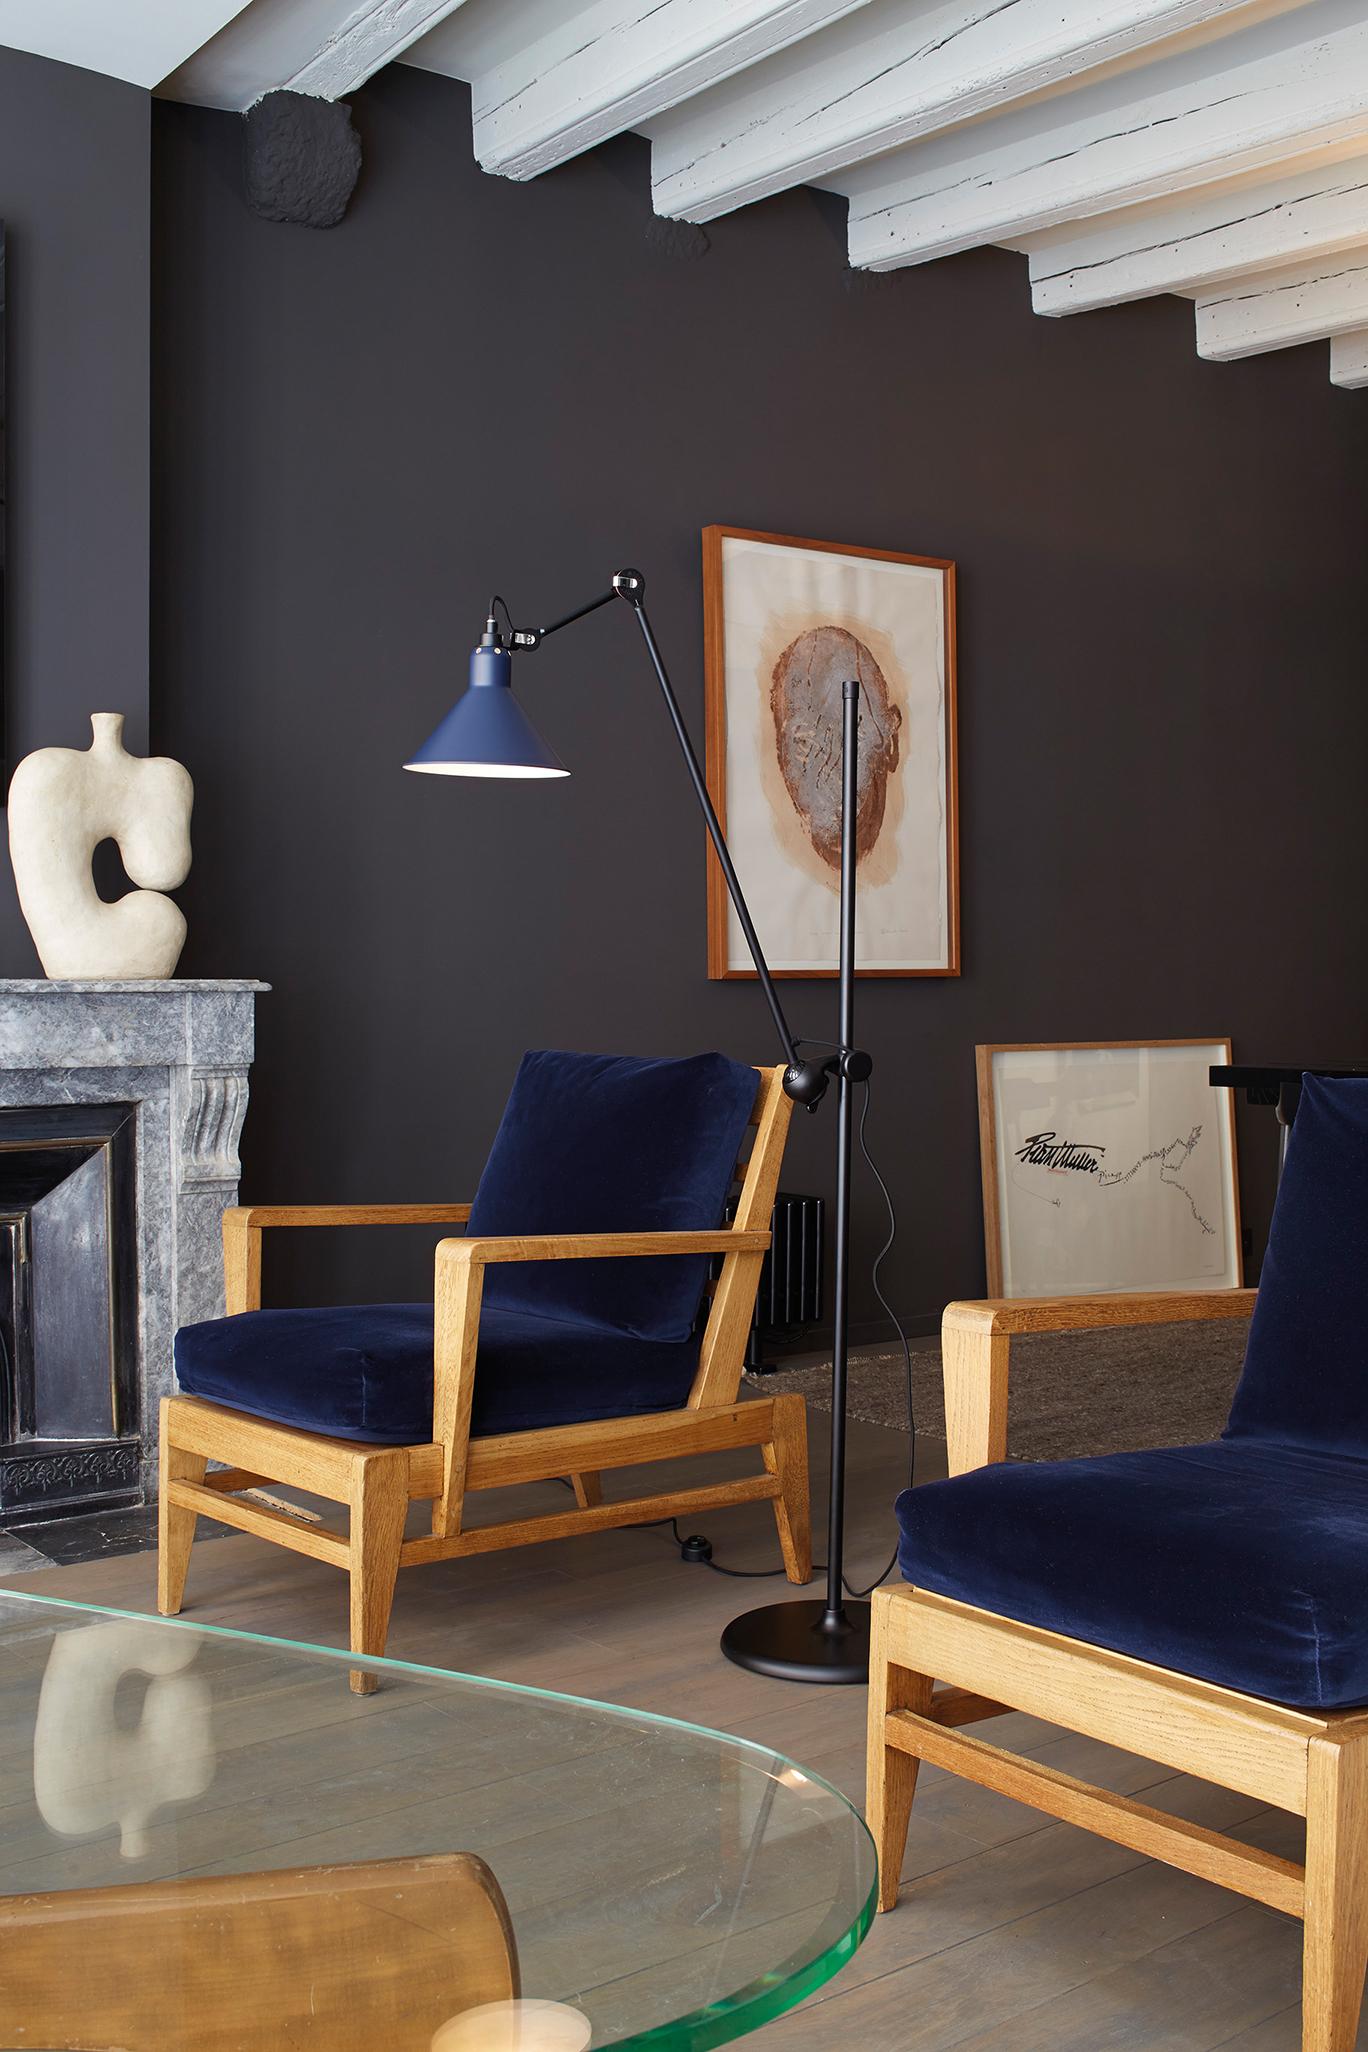 DCW Editions Lampe Gras N°215 Floor Lamp in Black Steel Arm and Blue Shade by Bernard-Albin Gras
 
 In 1921 Bernard-Albin GRAS designed a series of lamps for use in offices and in industrial environments. The GRAS lamp, as it was subsequently